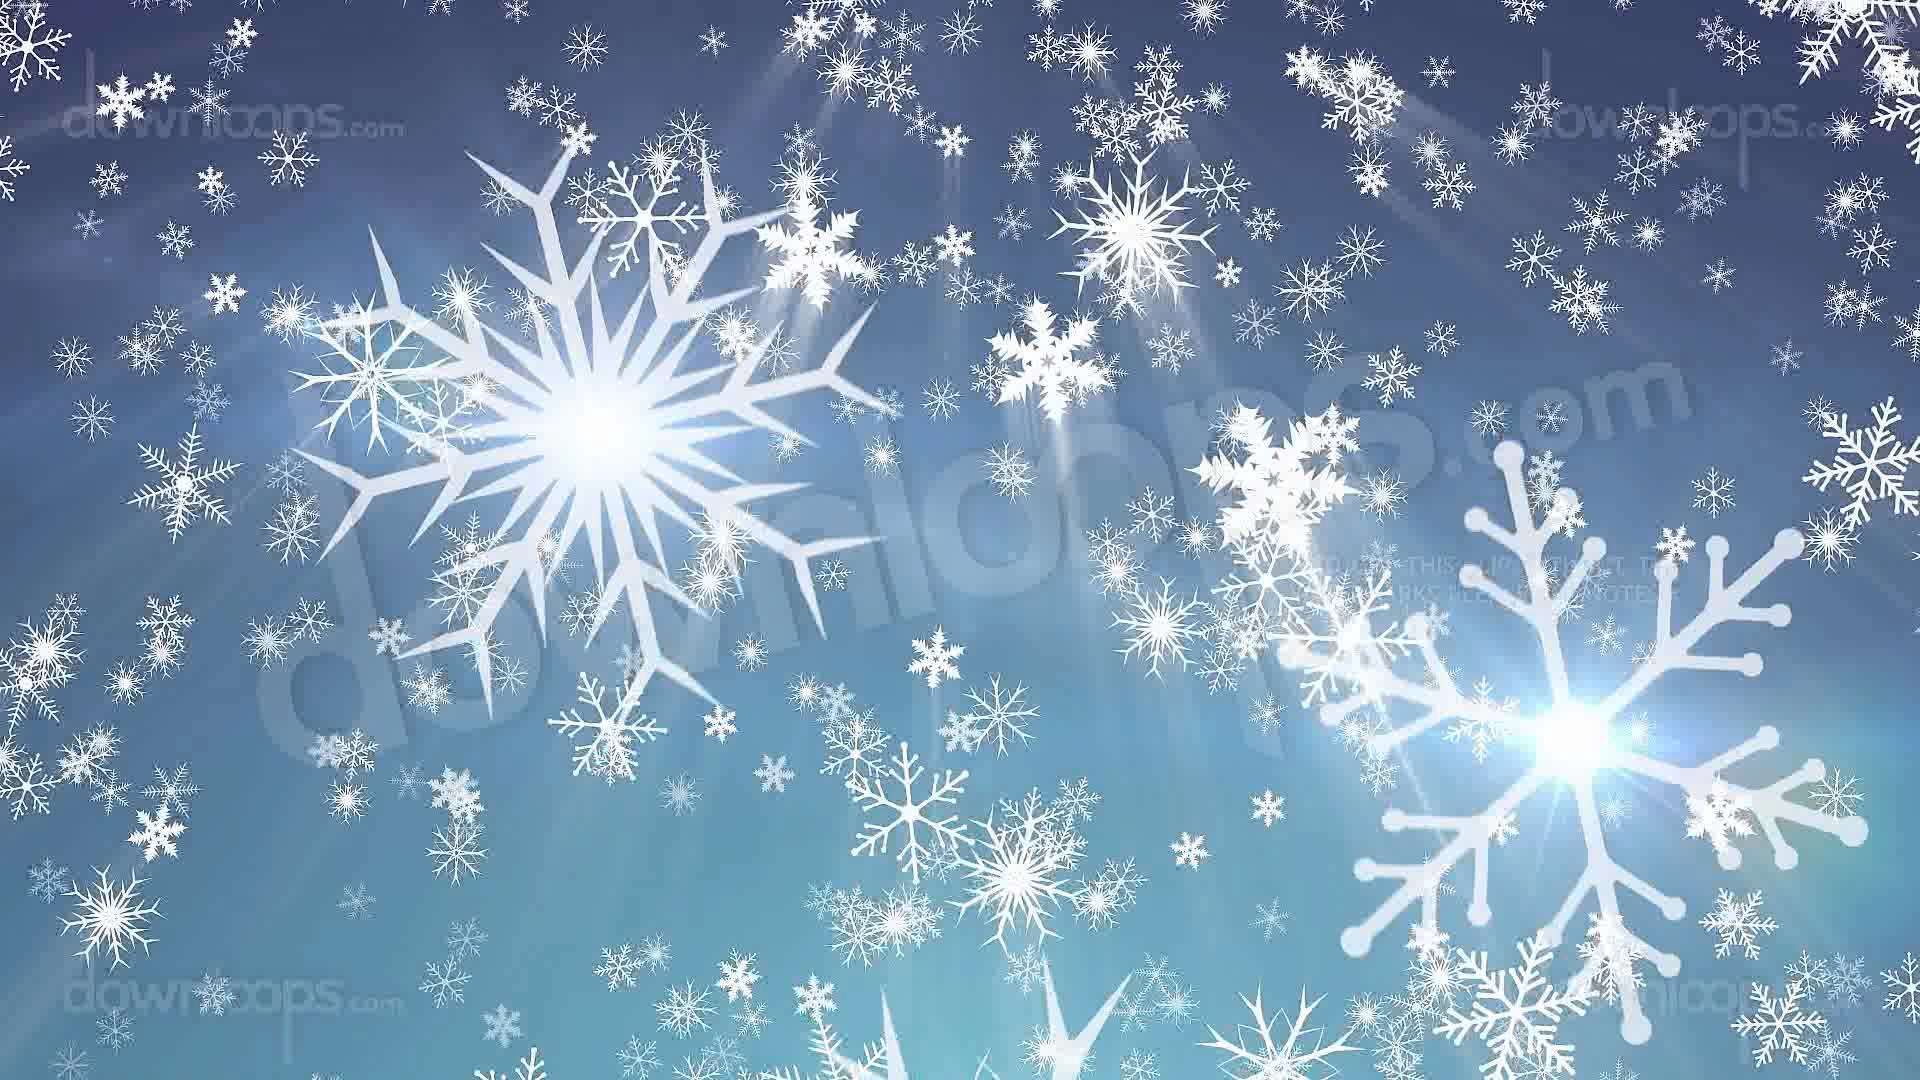 Falling Snow Animated Wallpaper (57+ images)